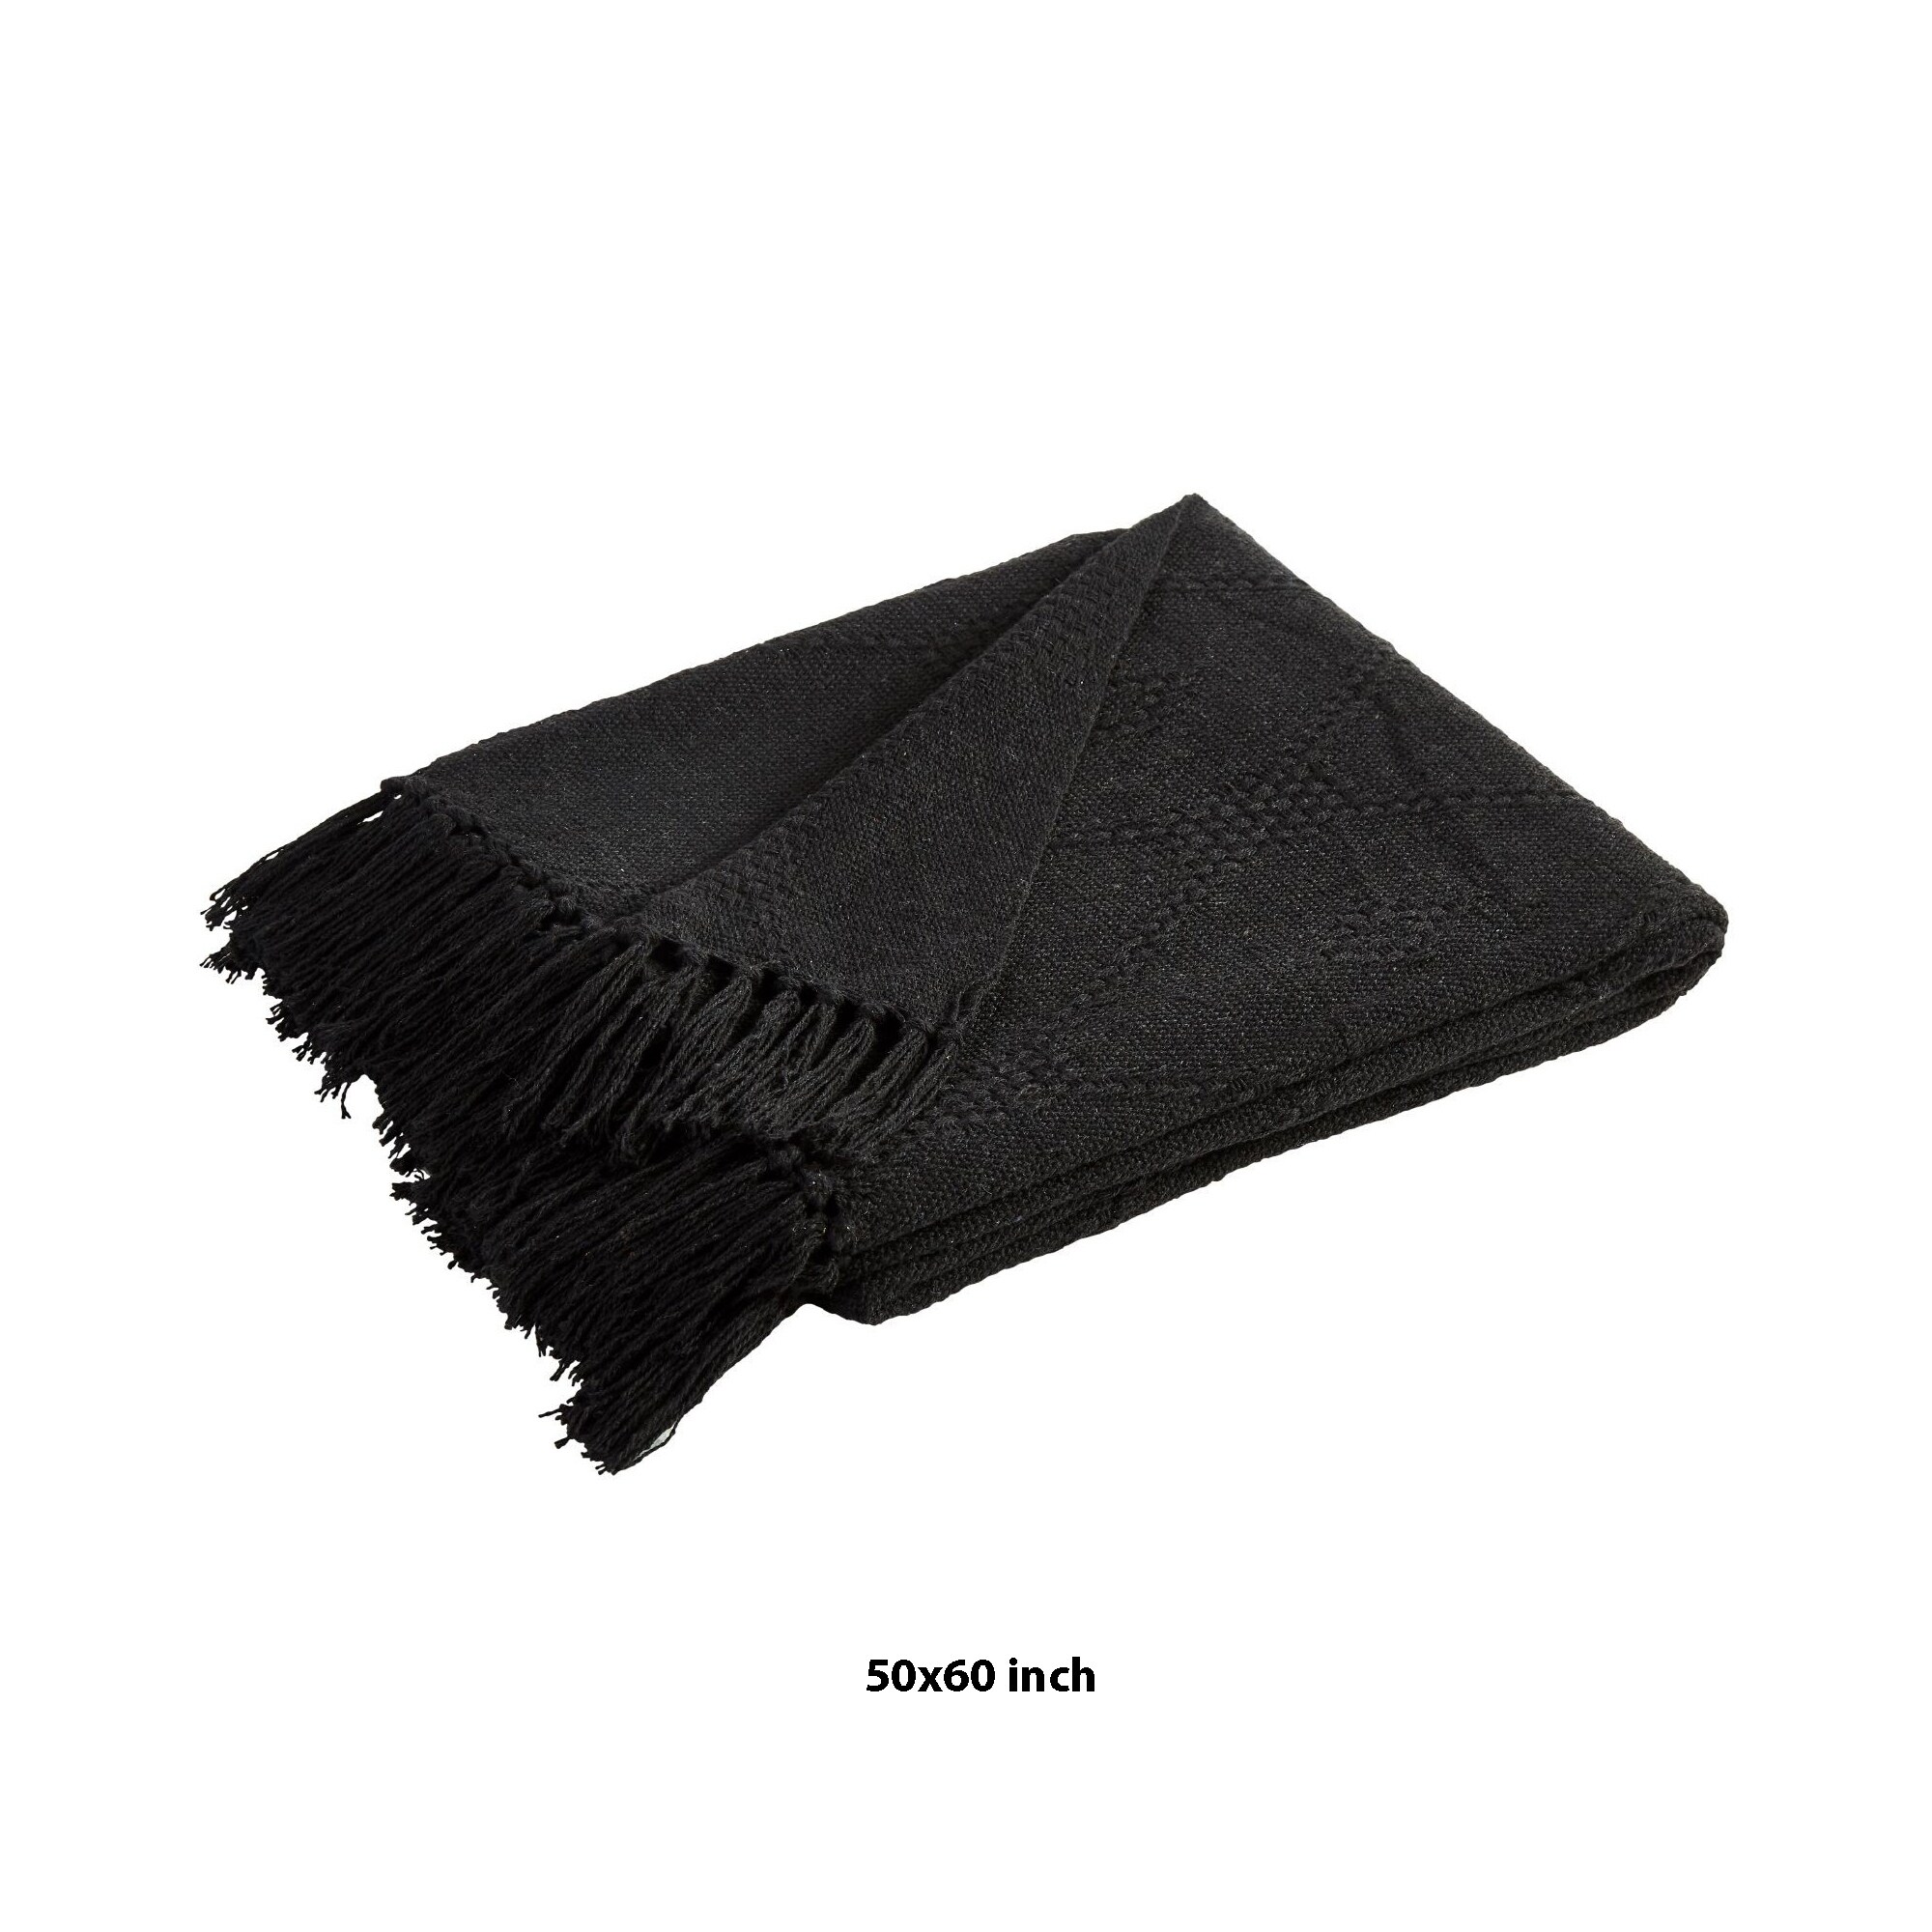 Lyon Fabric Throw with Textured Waffle Weave Design The Urban Port, Set of 2, Black